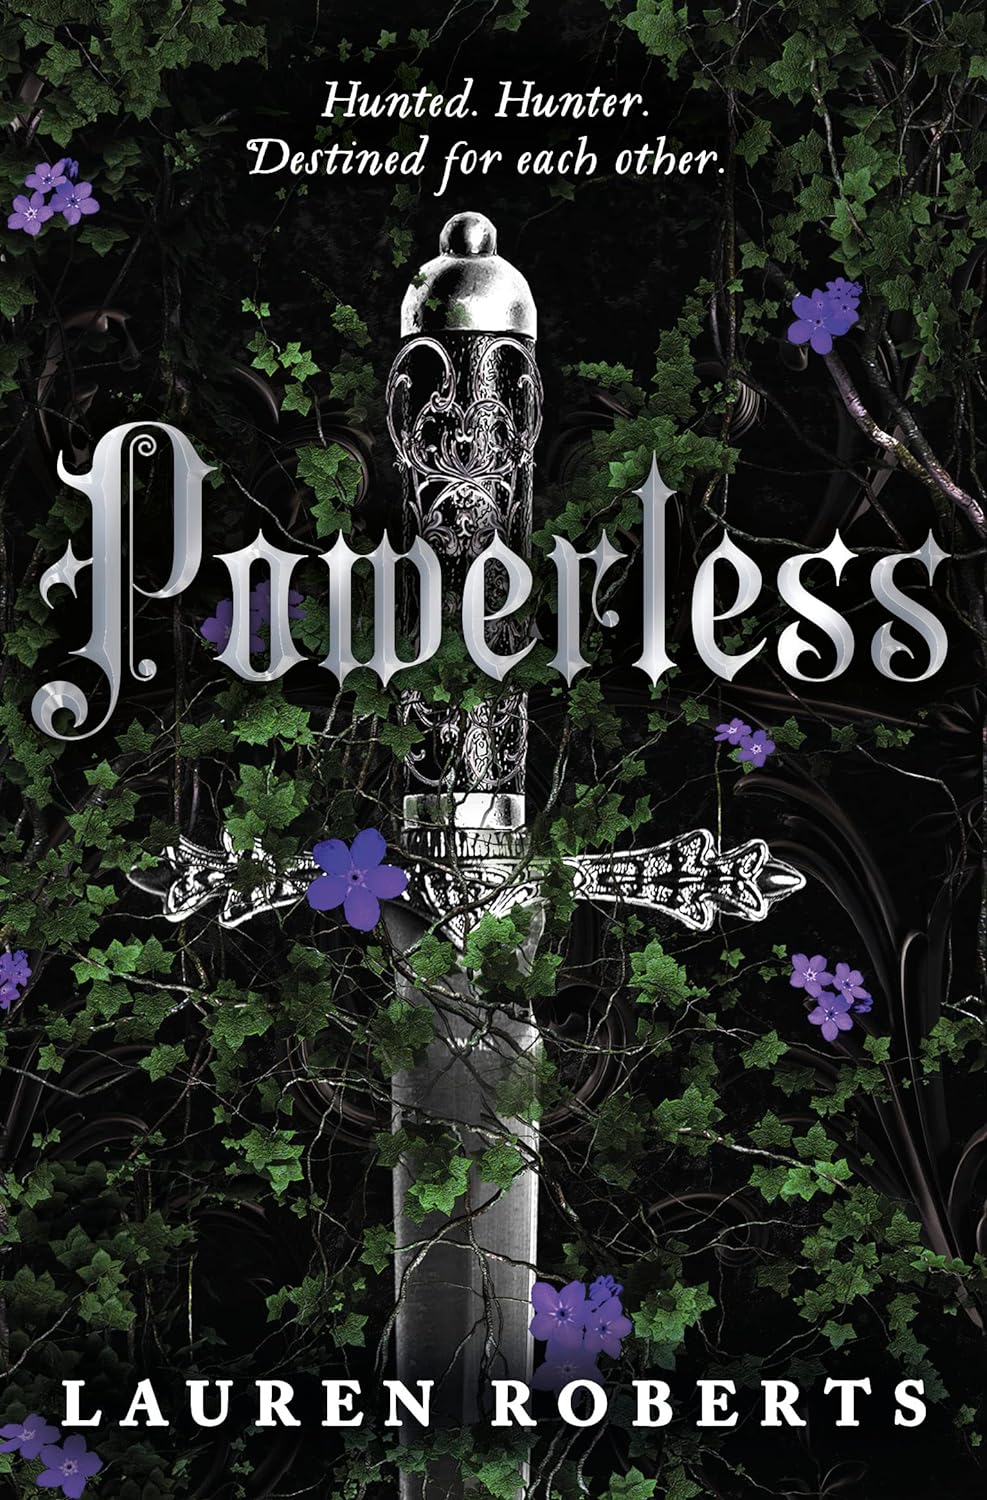 Powerless: TikTok made me buy it! The most epic and sizzling fantasy romance book of the year by Lauren Roberts